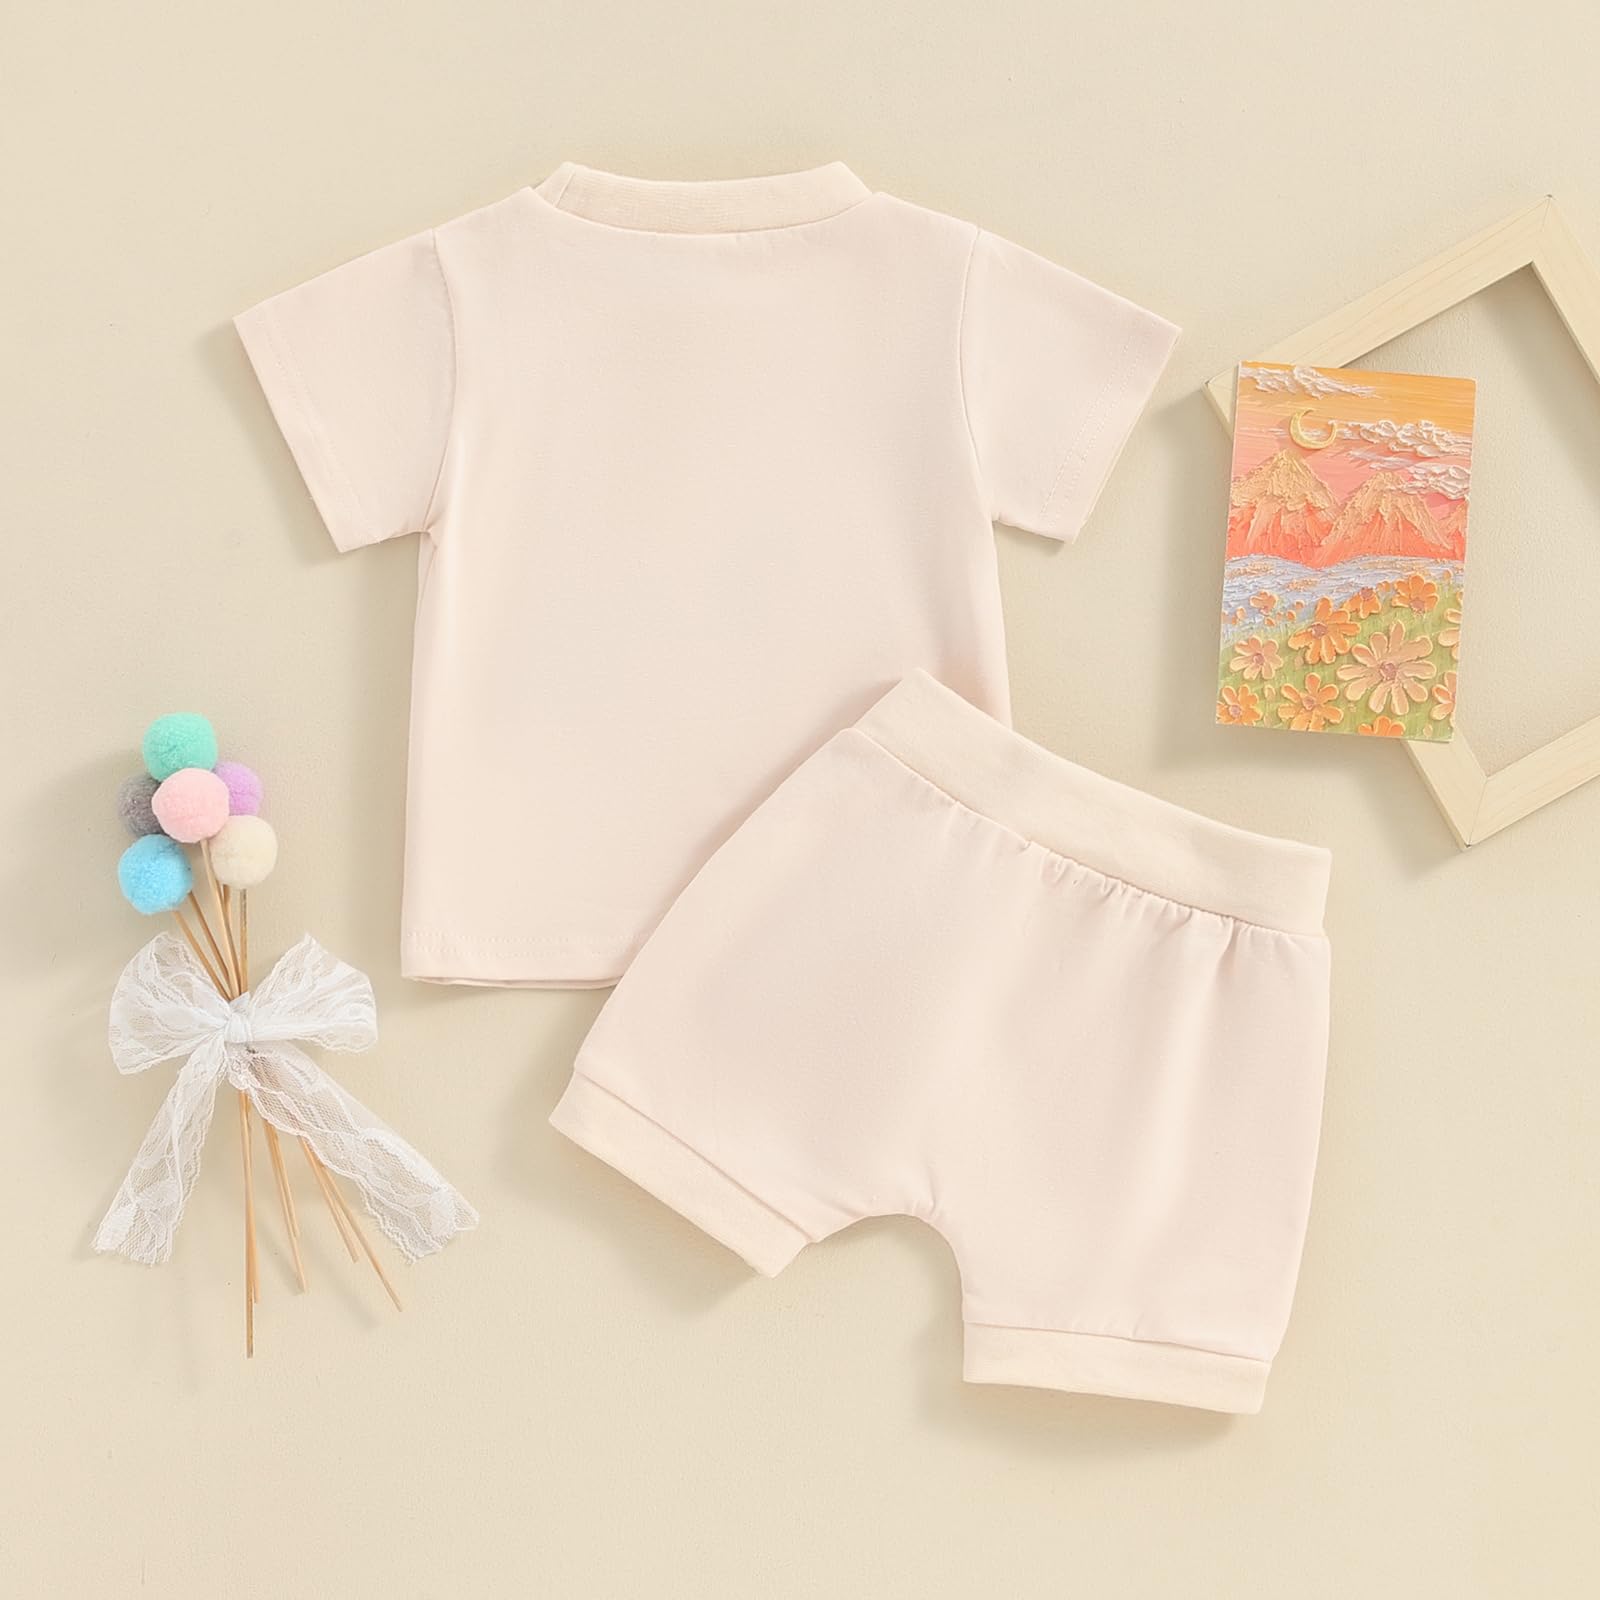 Kupretty Toddler Baby Girl Summer Clothes Solid Plain Short Sleeve Ruffle T-shirt Tee Tops + Shorts Infant Clothing Set